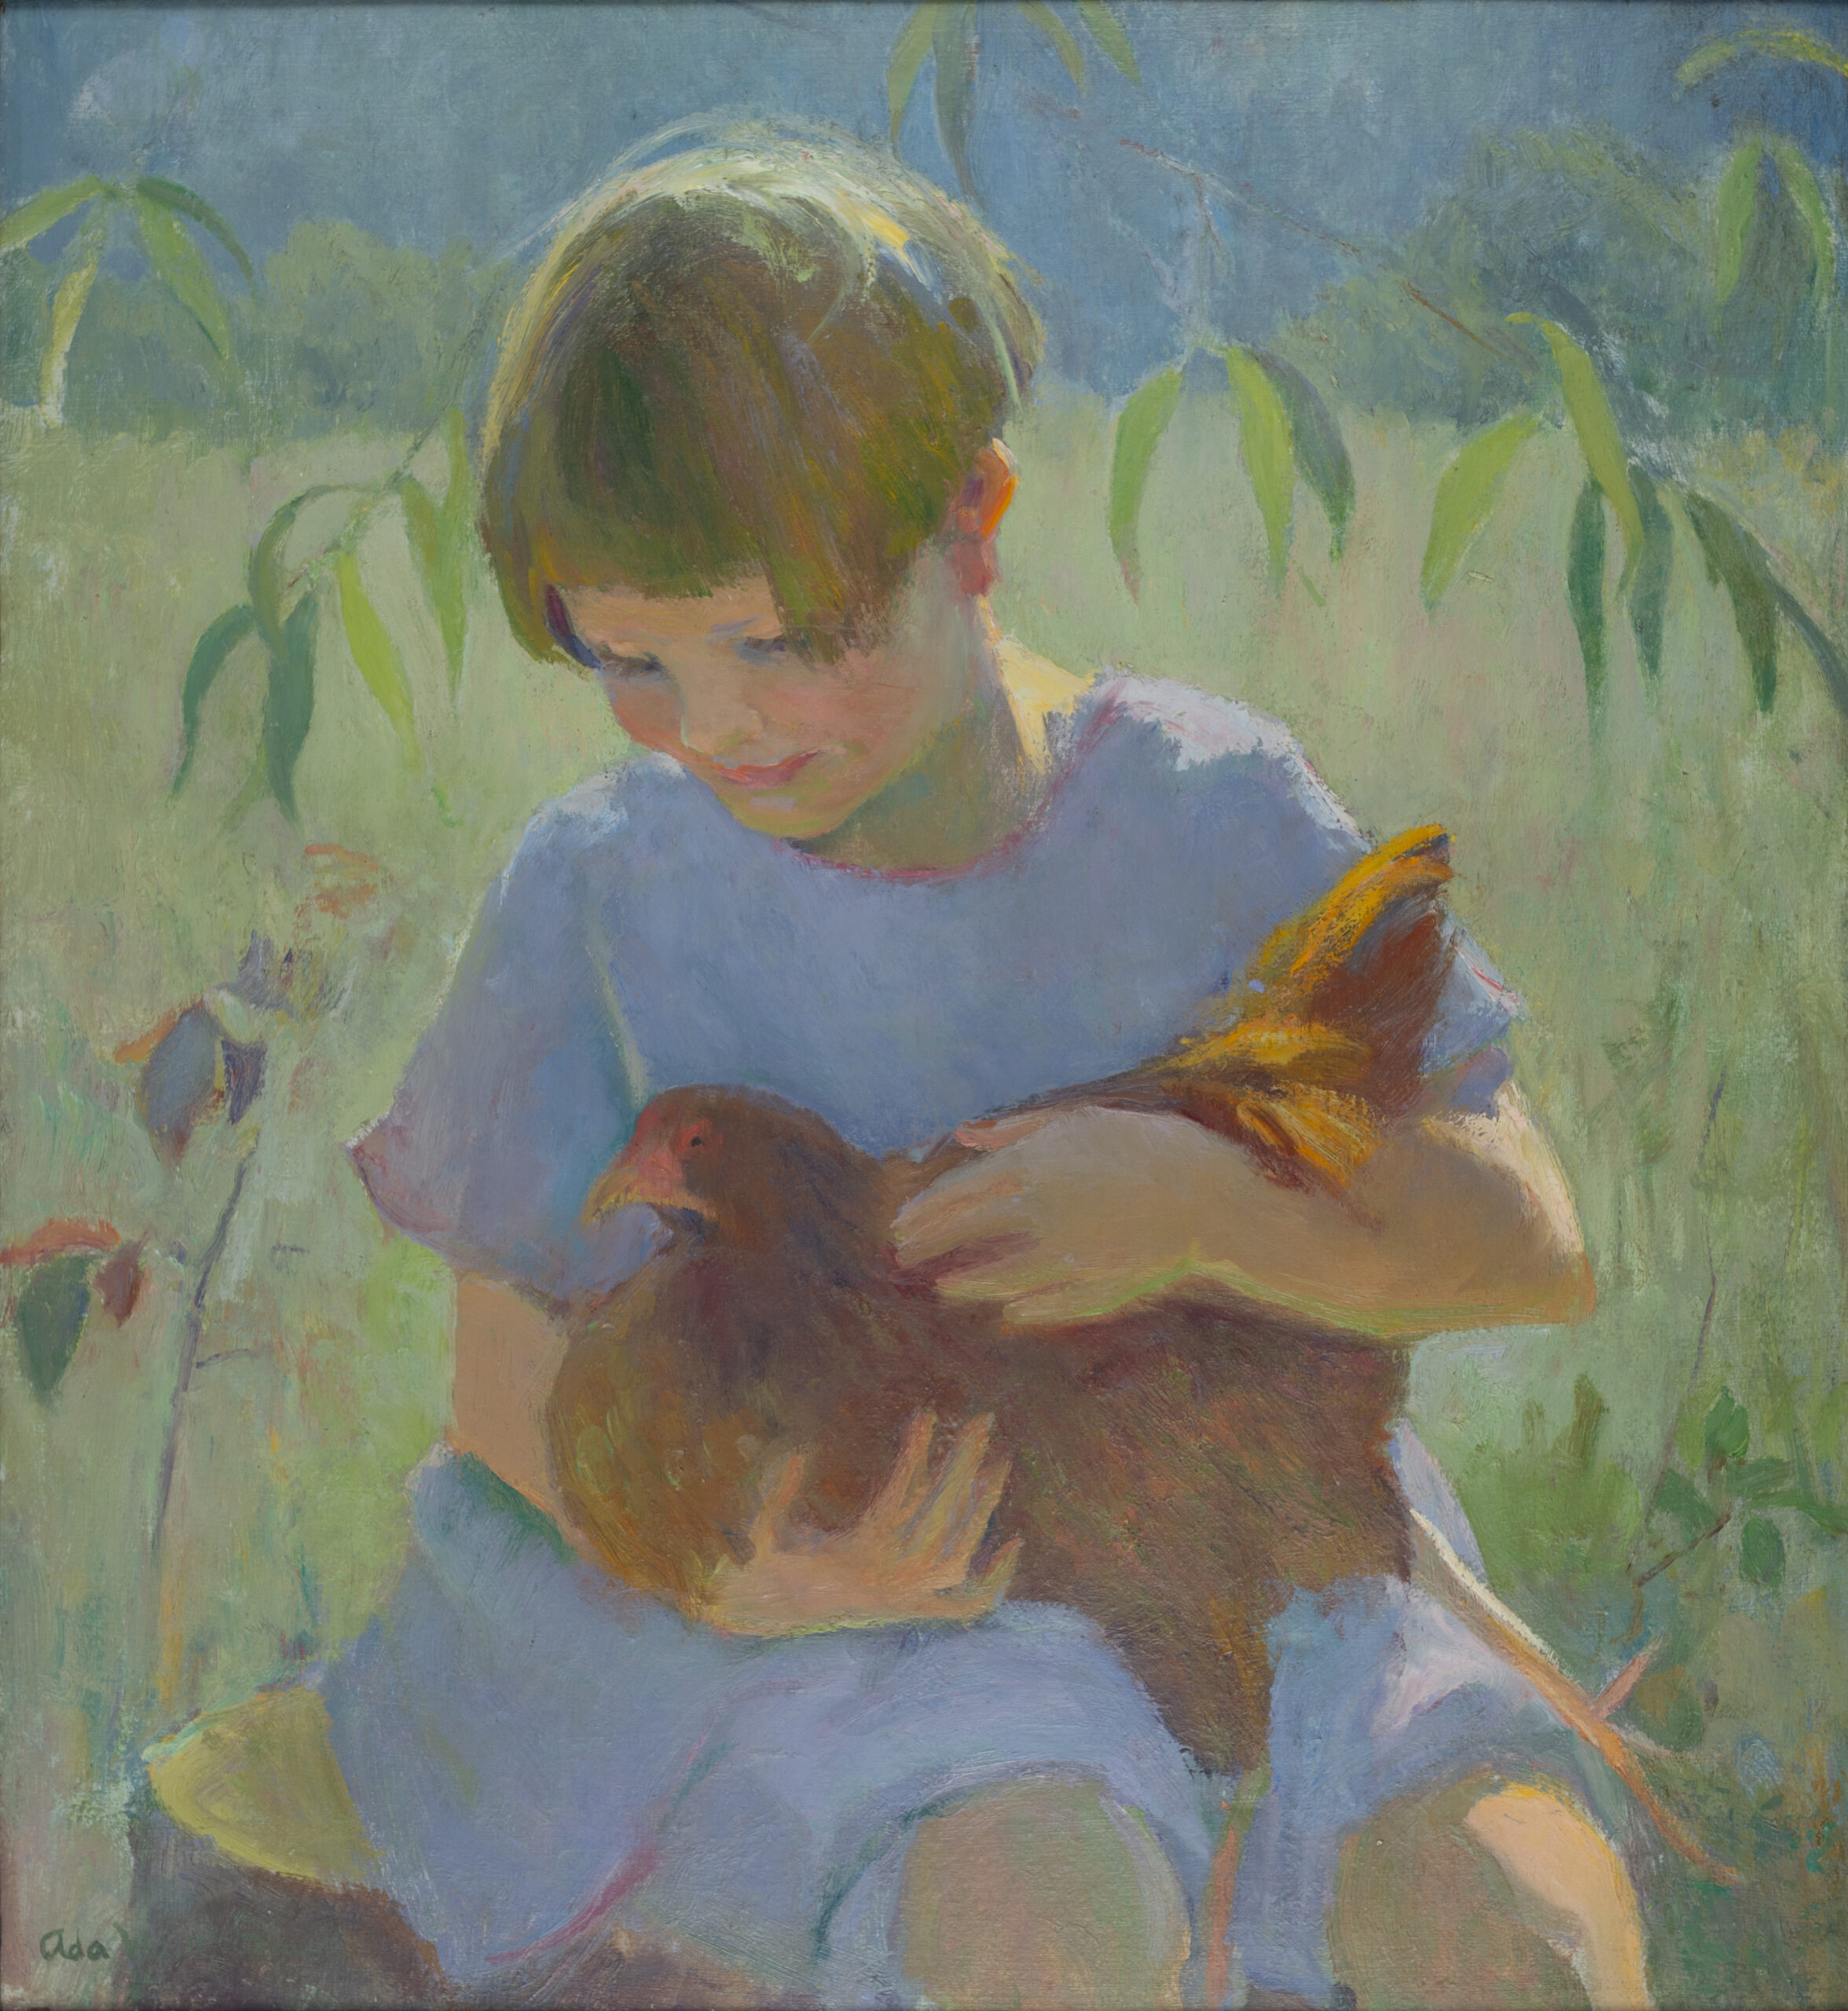 Impressionist painting. A child with short brown hair, dressed in blue summer clothes sits on a stump holding a red pullet hen. the background is green foliage.